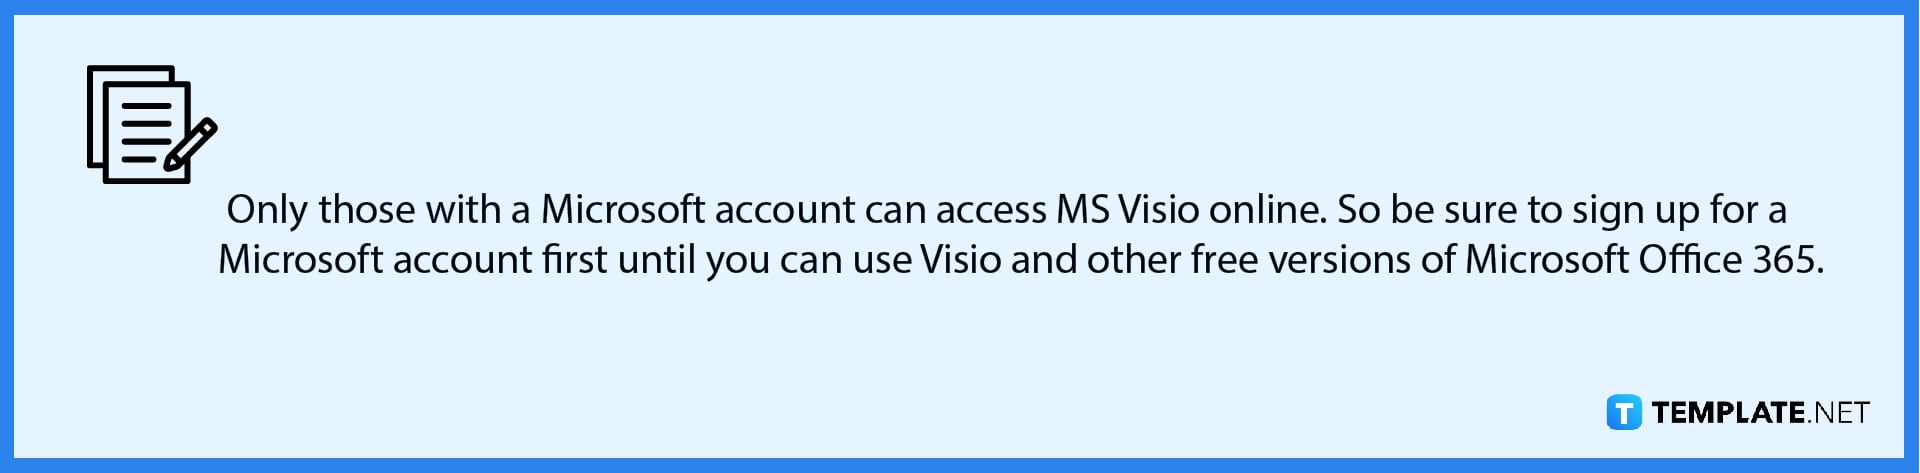 how-can-i-download-microsoft-visio-for-free-note-01